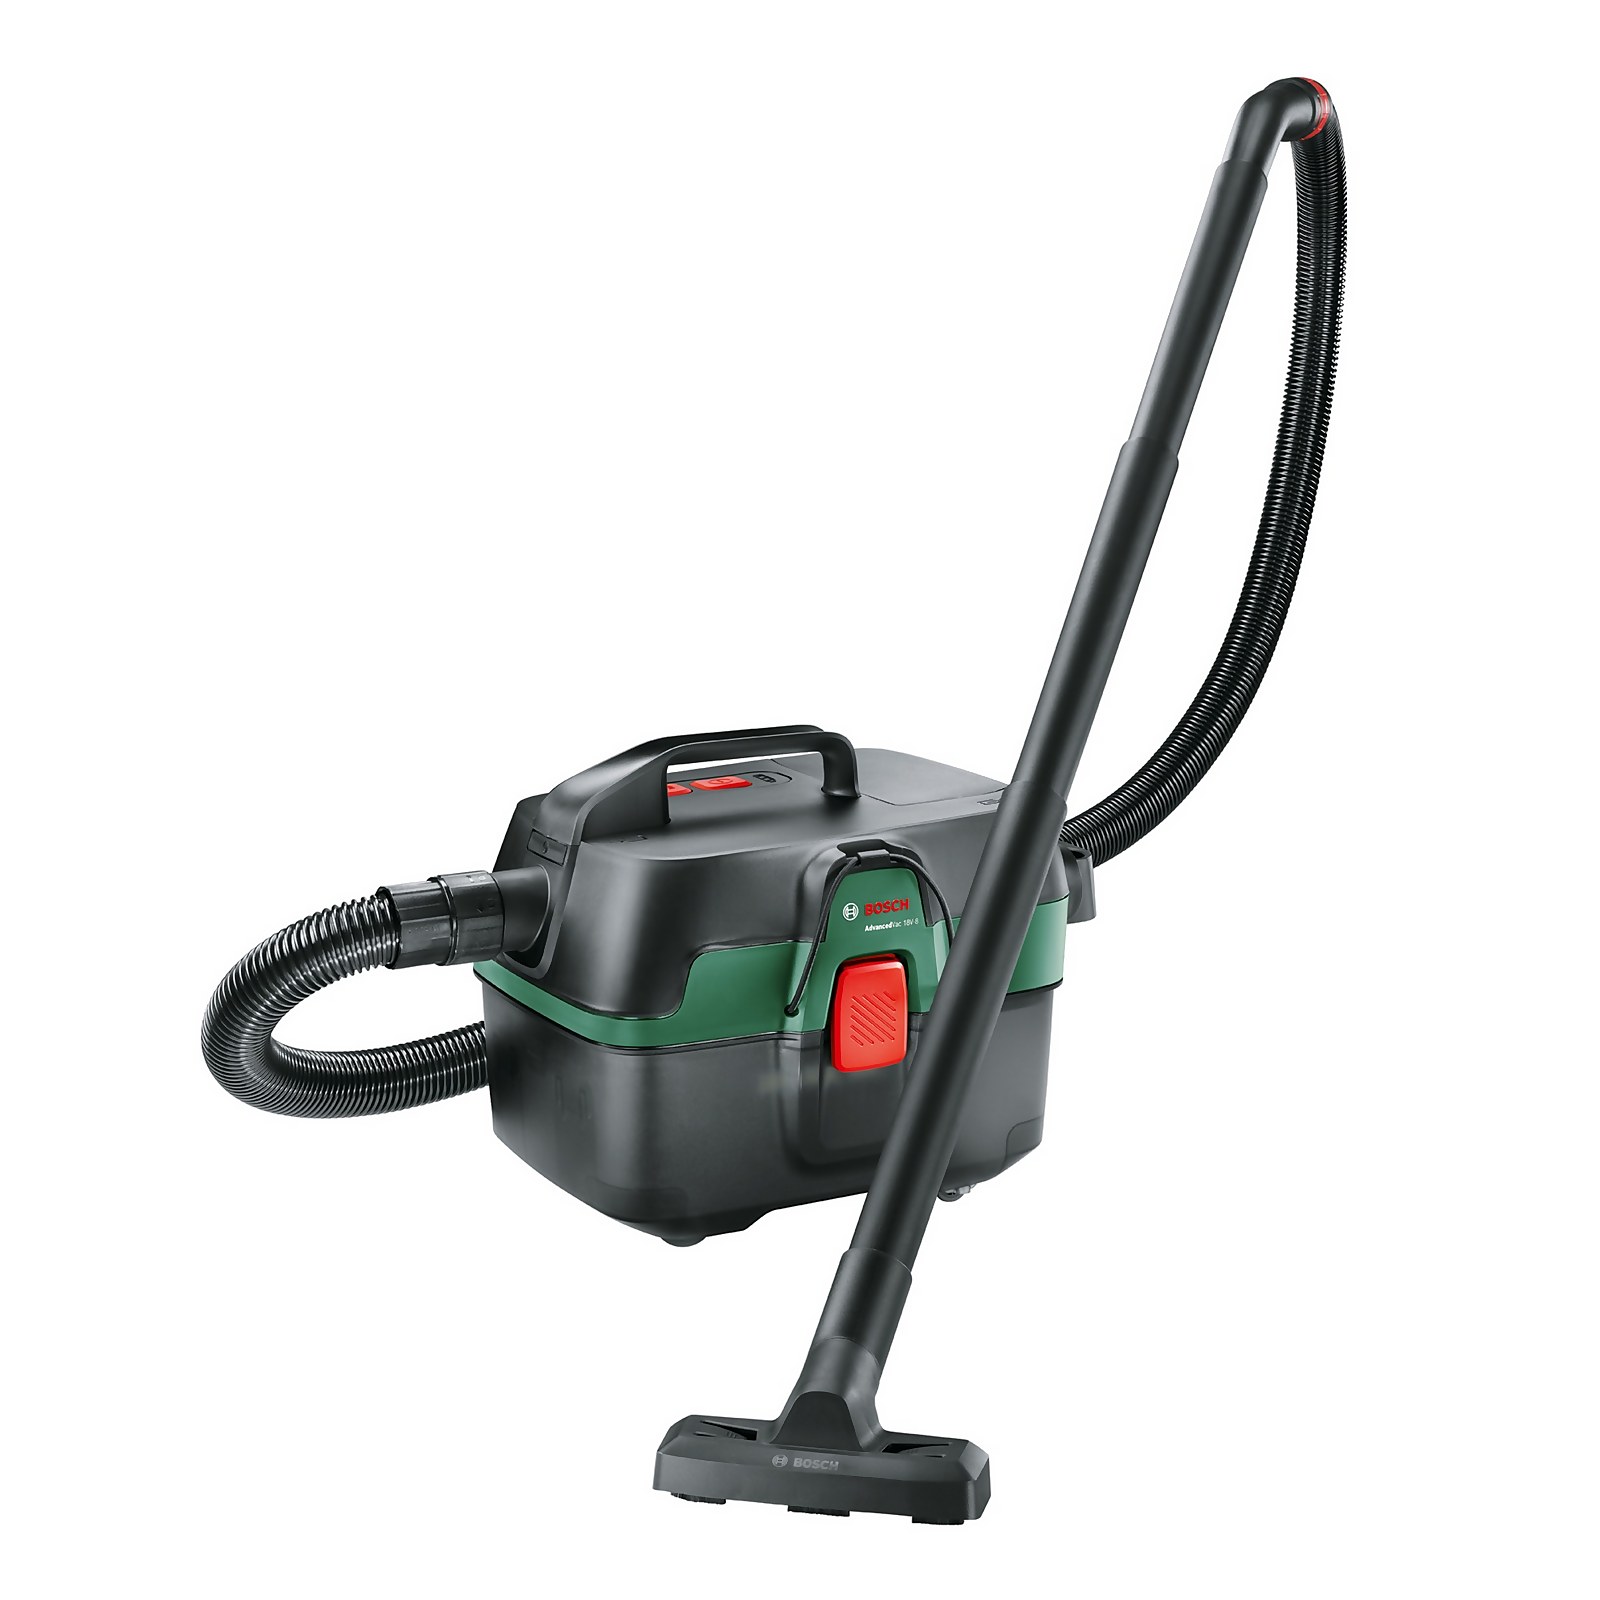 Bosch AdvancedVac 18V Cordless Wet and Dry Vacuum Cleaner (no battery included)